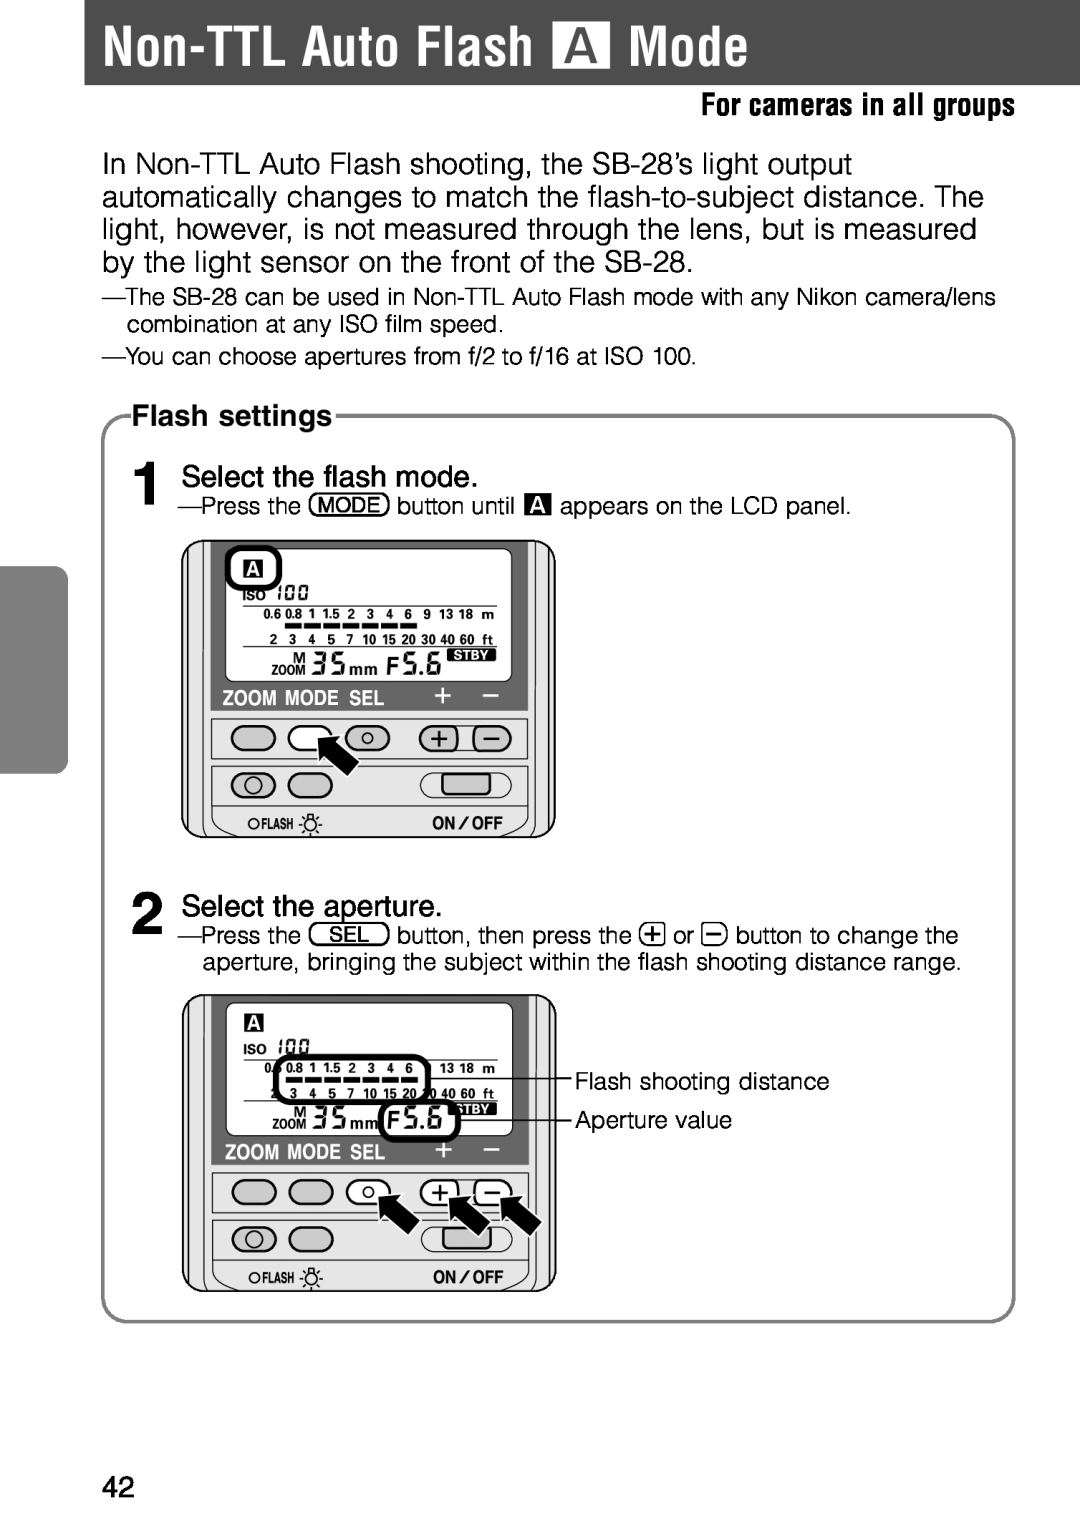 Nikon SB-28 instruction manual Non-TTLAuto Flash ˙ Mode, For cameras in all groups, Flash settings 